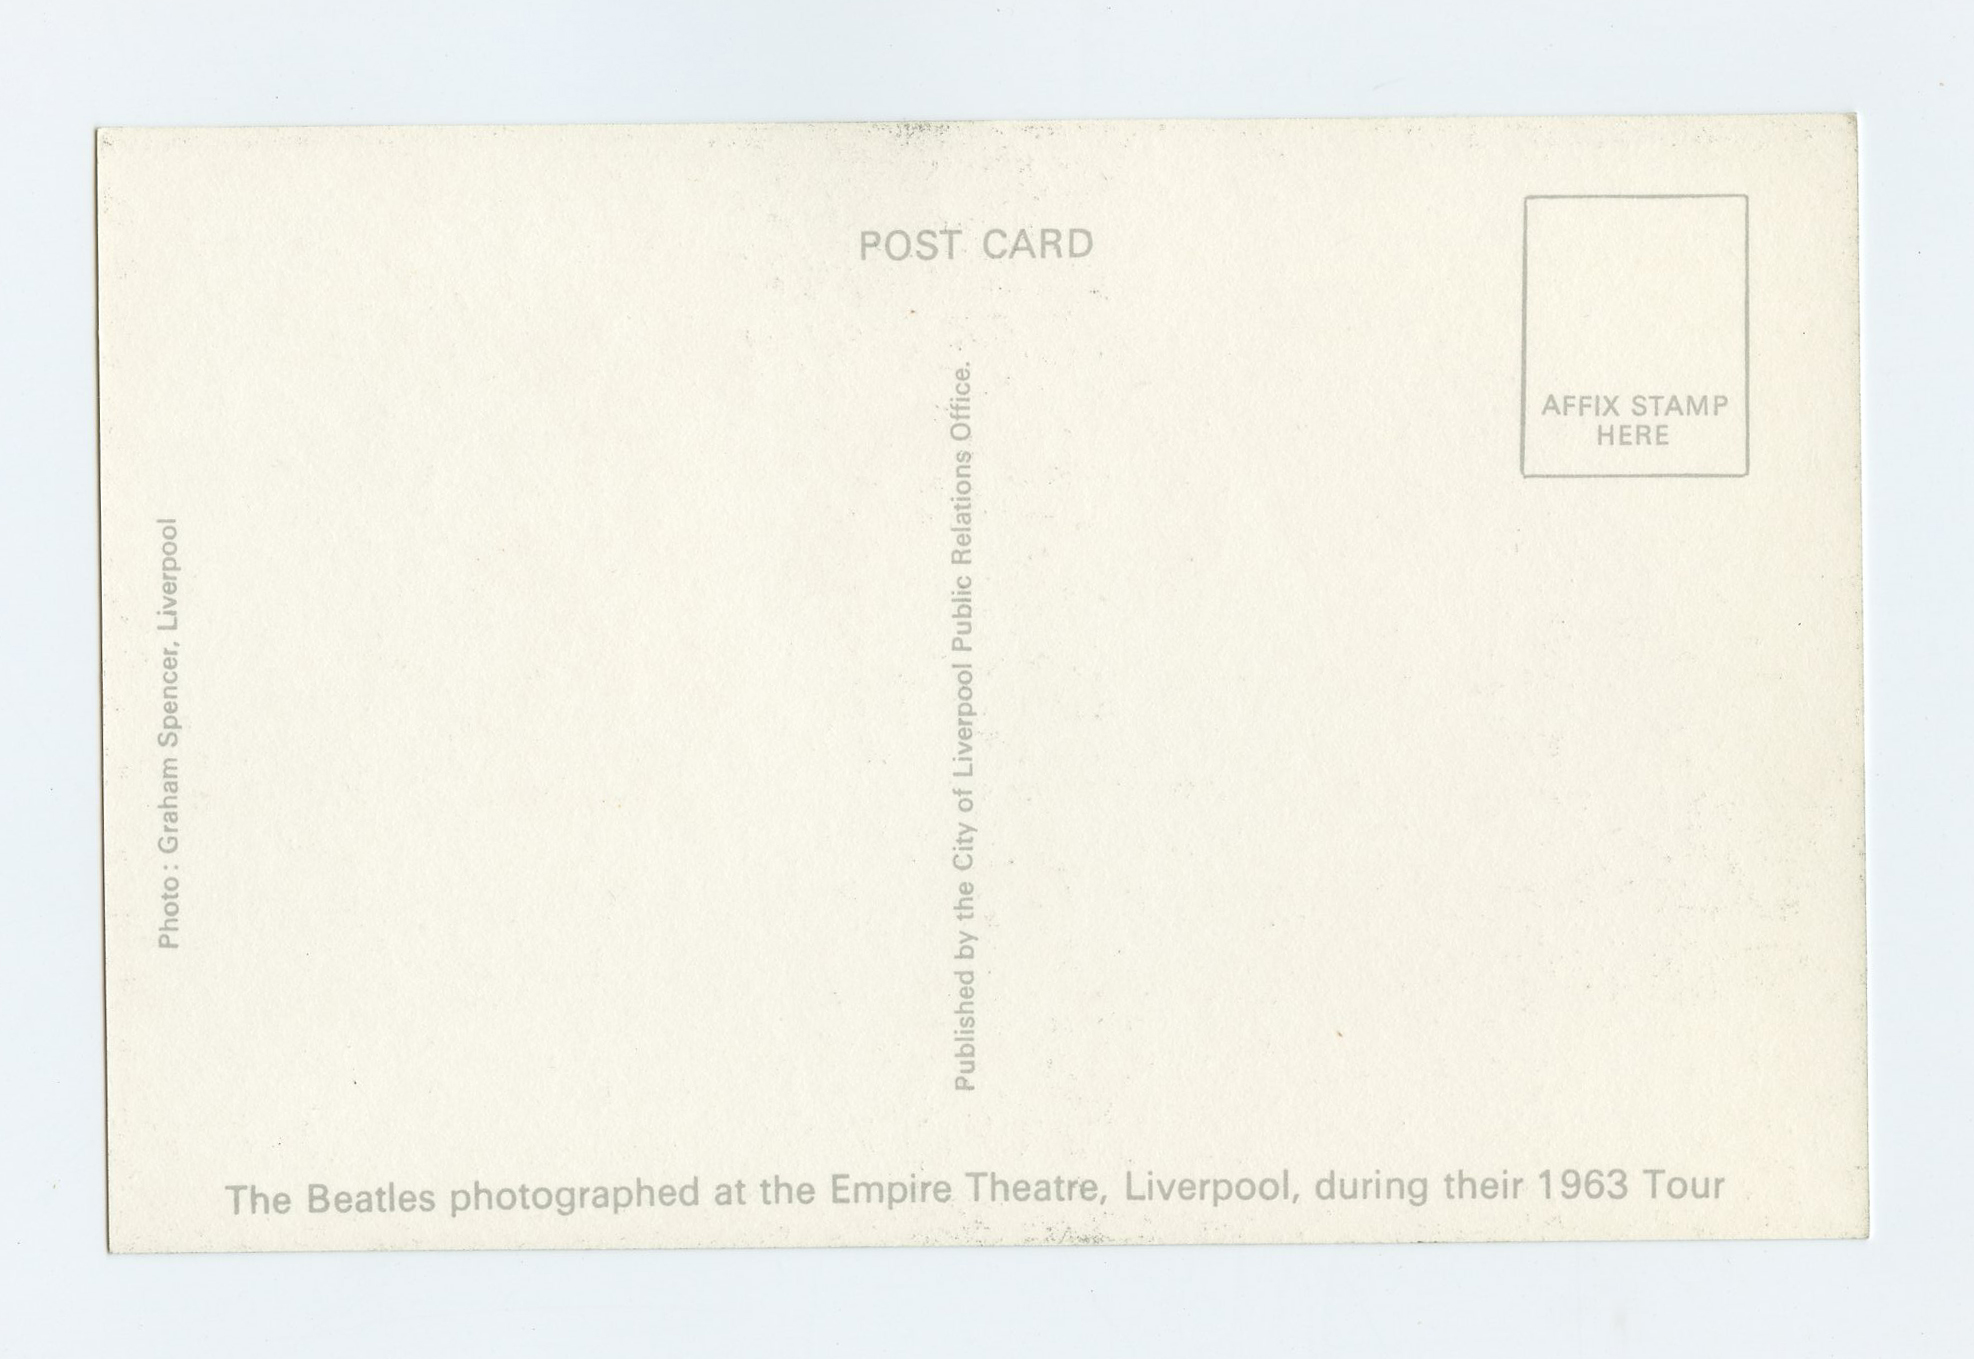 The Beatles Postcard at the Empire Theatre Liverpool 1963 Tour Graham Spencer